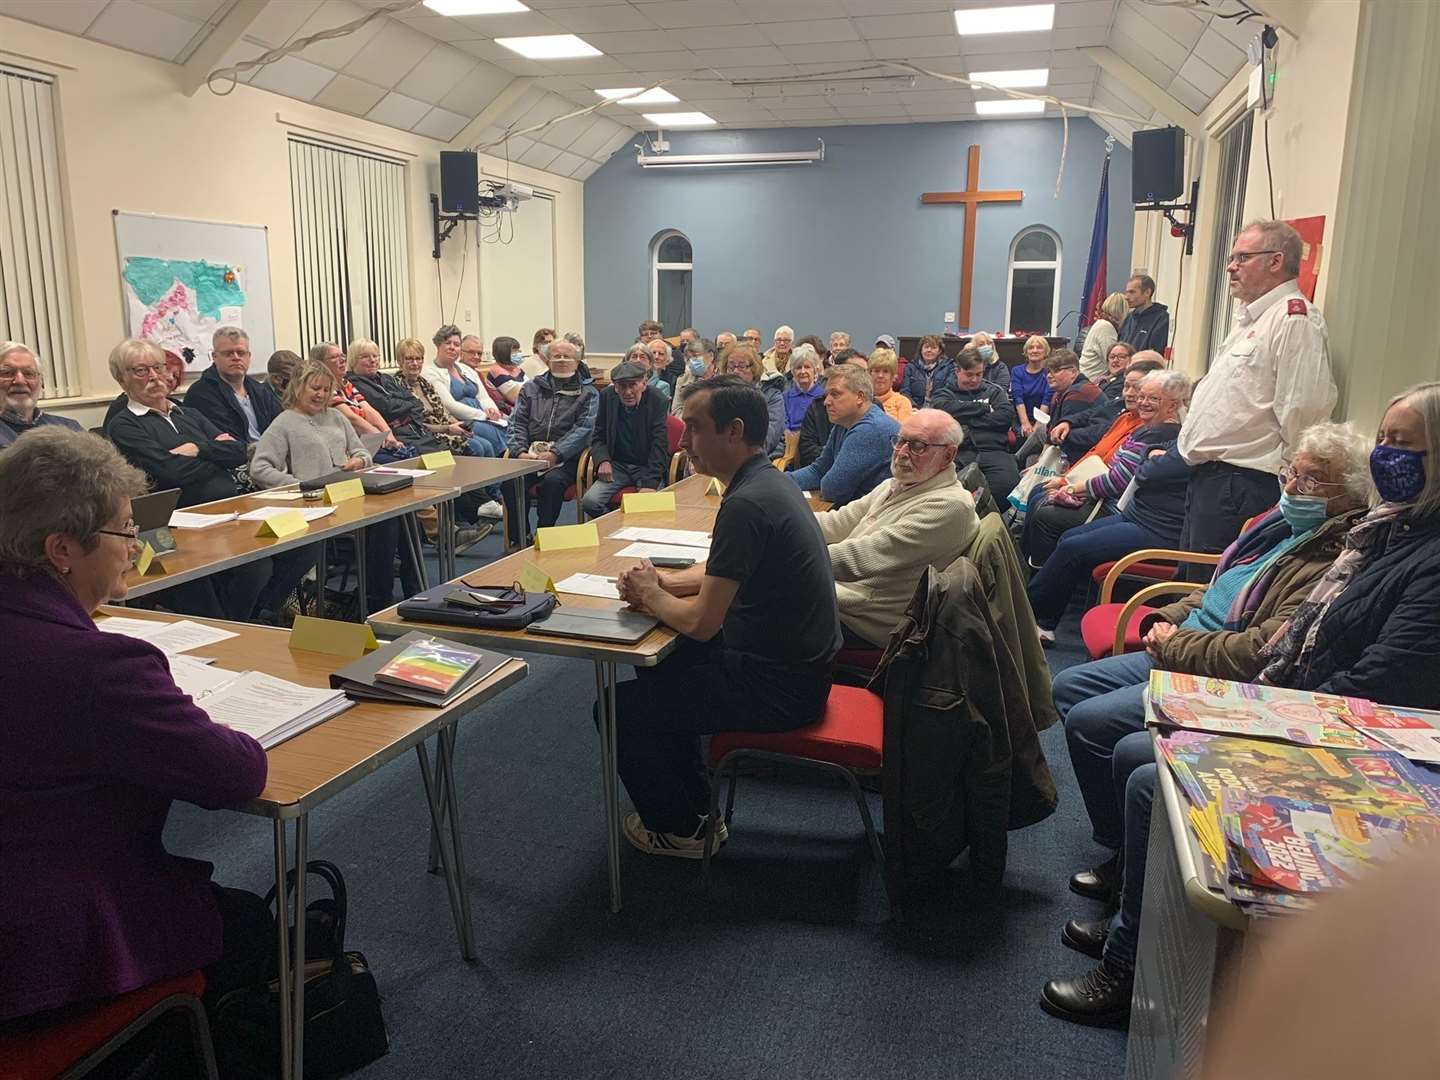 South Willesborough and Newtown (SWAN) Community Council held a public meeting on Monday to discuss the route closure